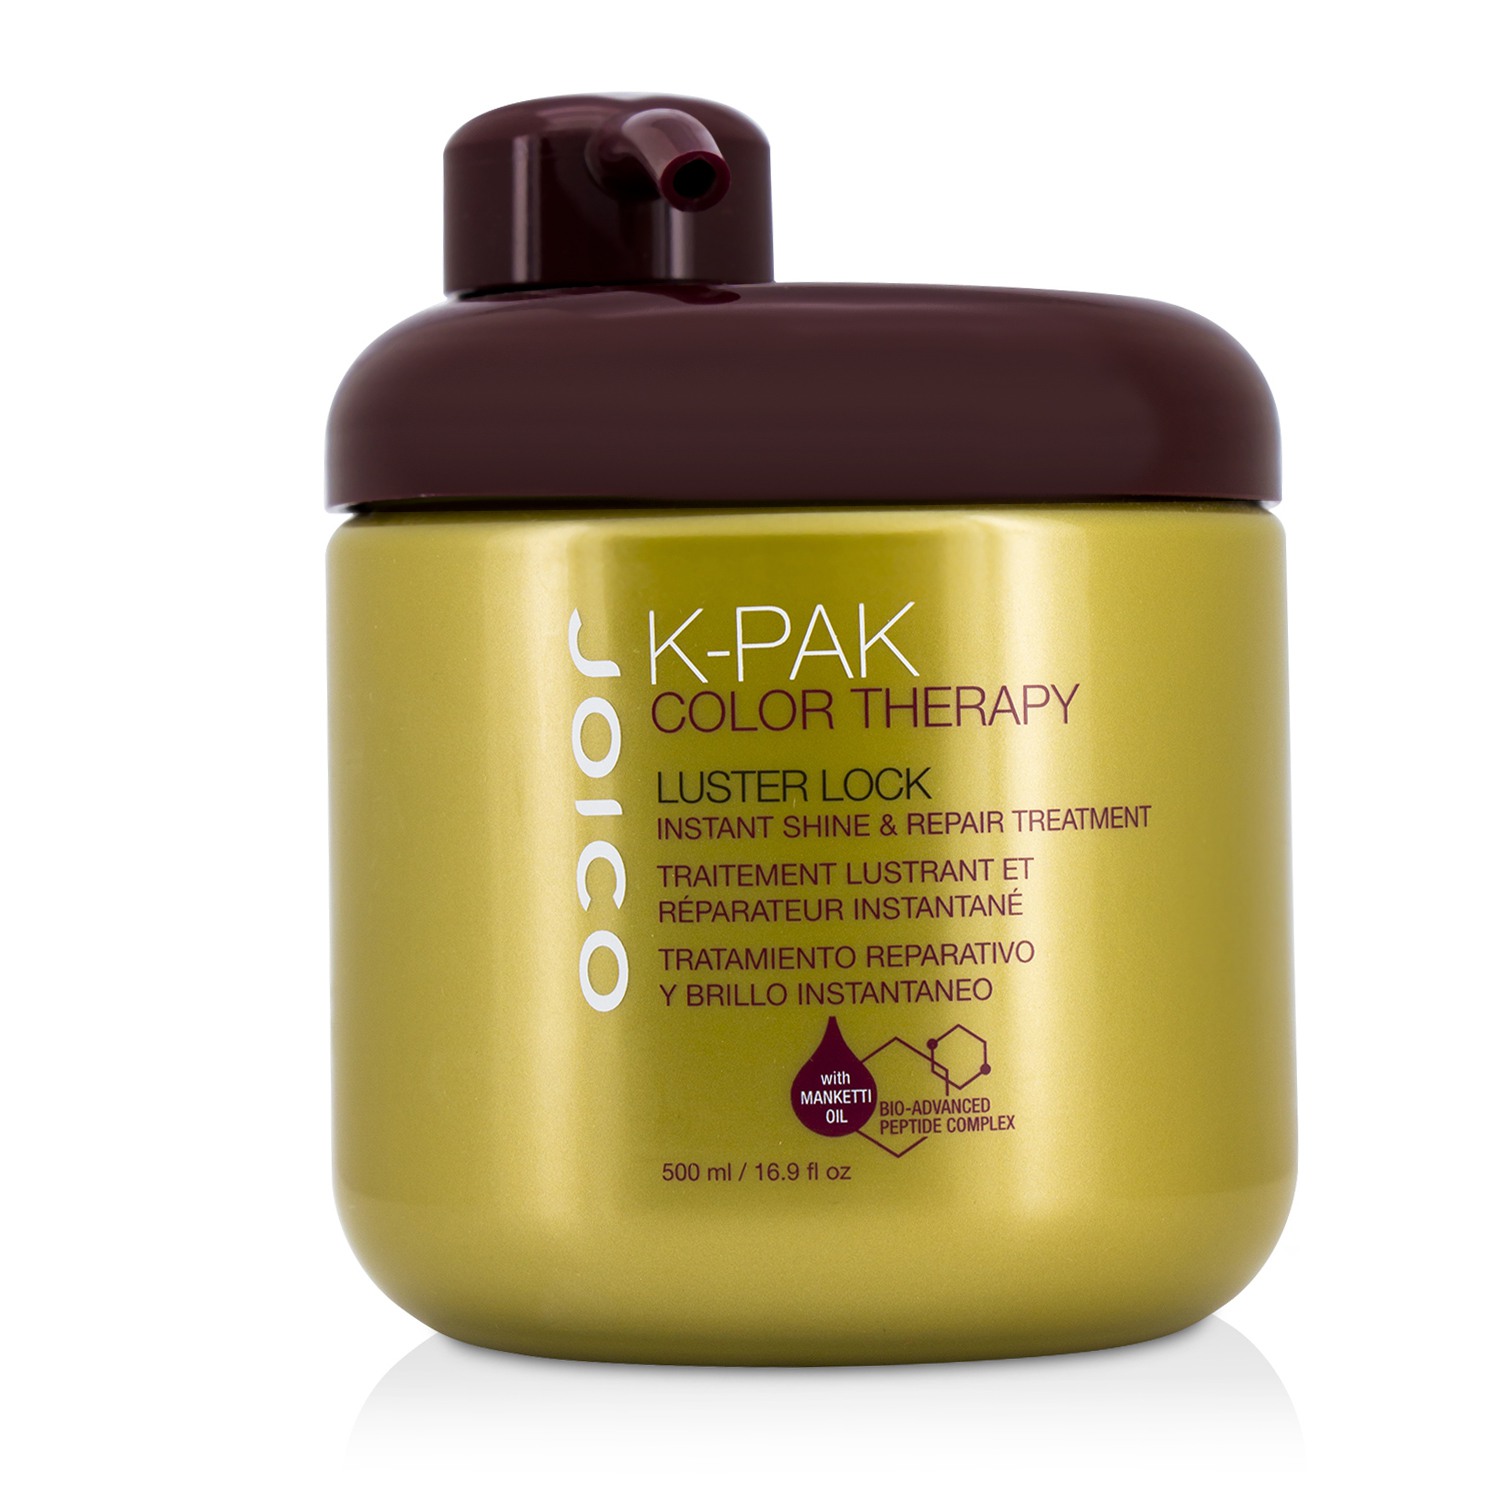 K-Pak Color Therapy Luster Lock Instant Shine & Repair Treatment Joico Image